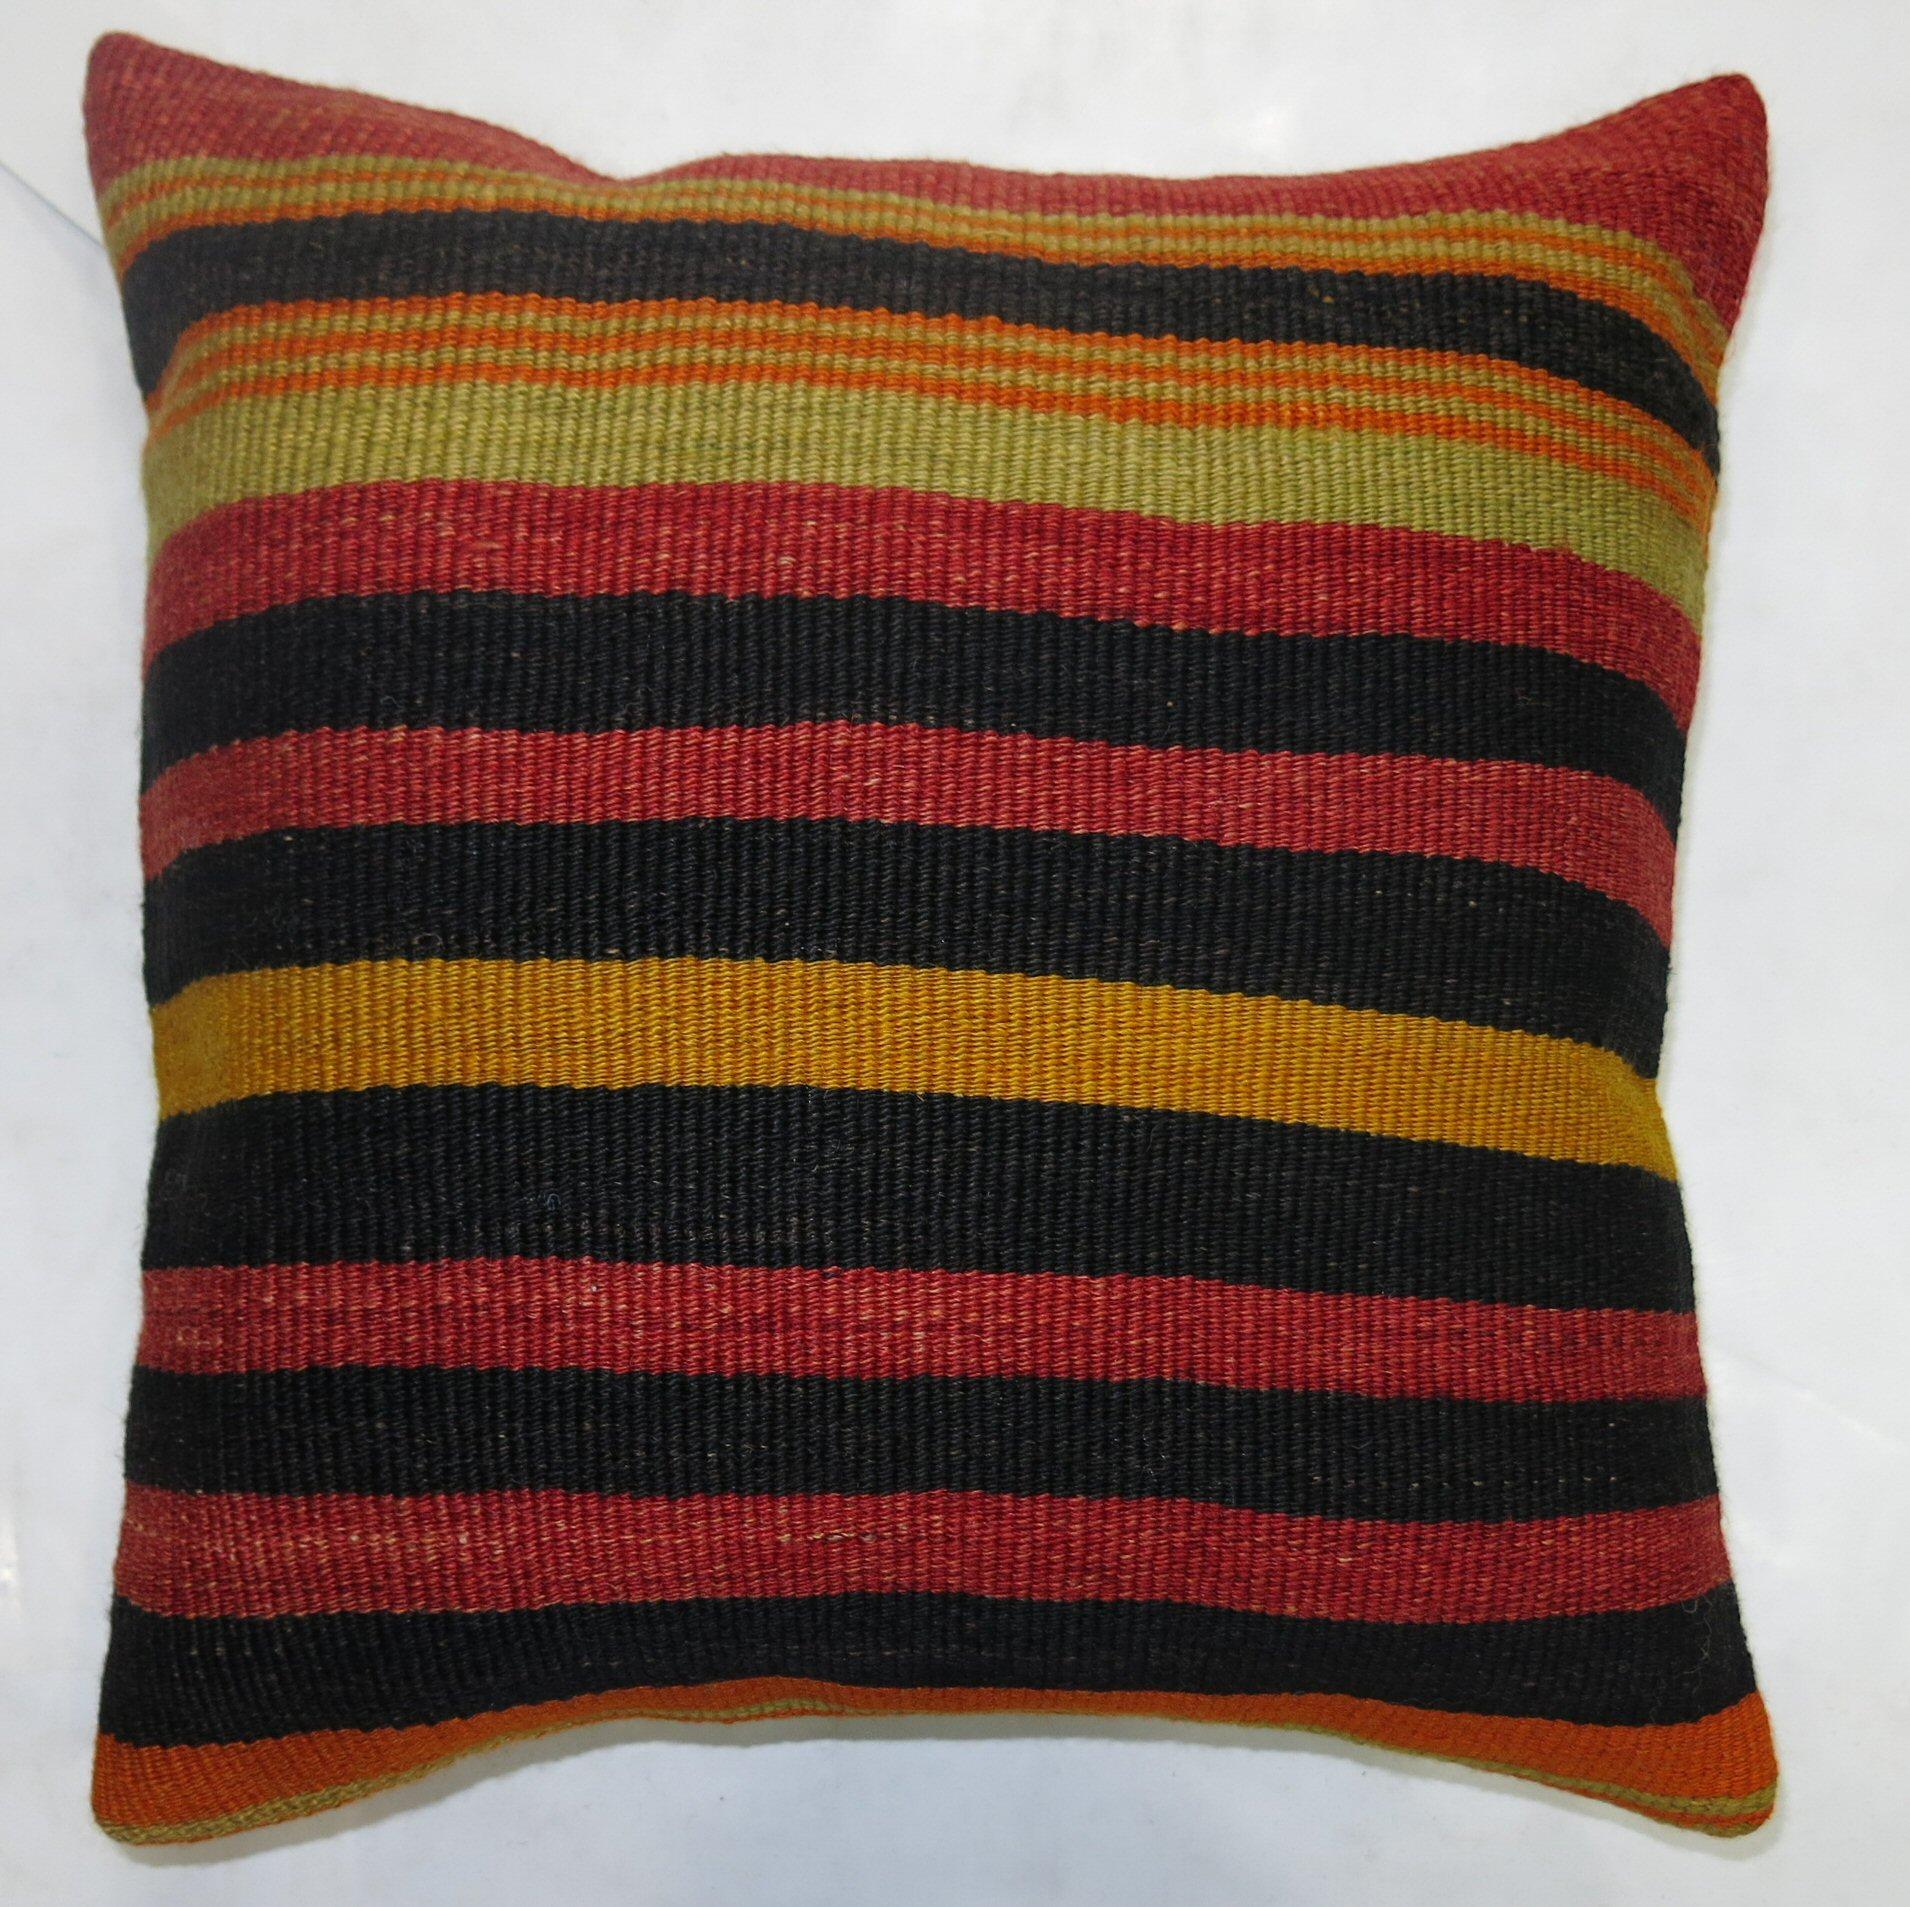 Pillow made from a vintage striped turkish kilim

Measures: 16